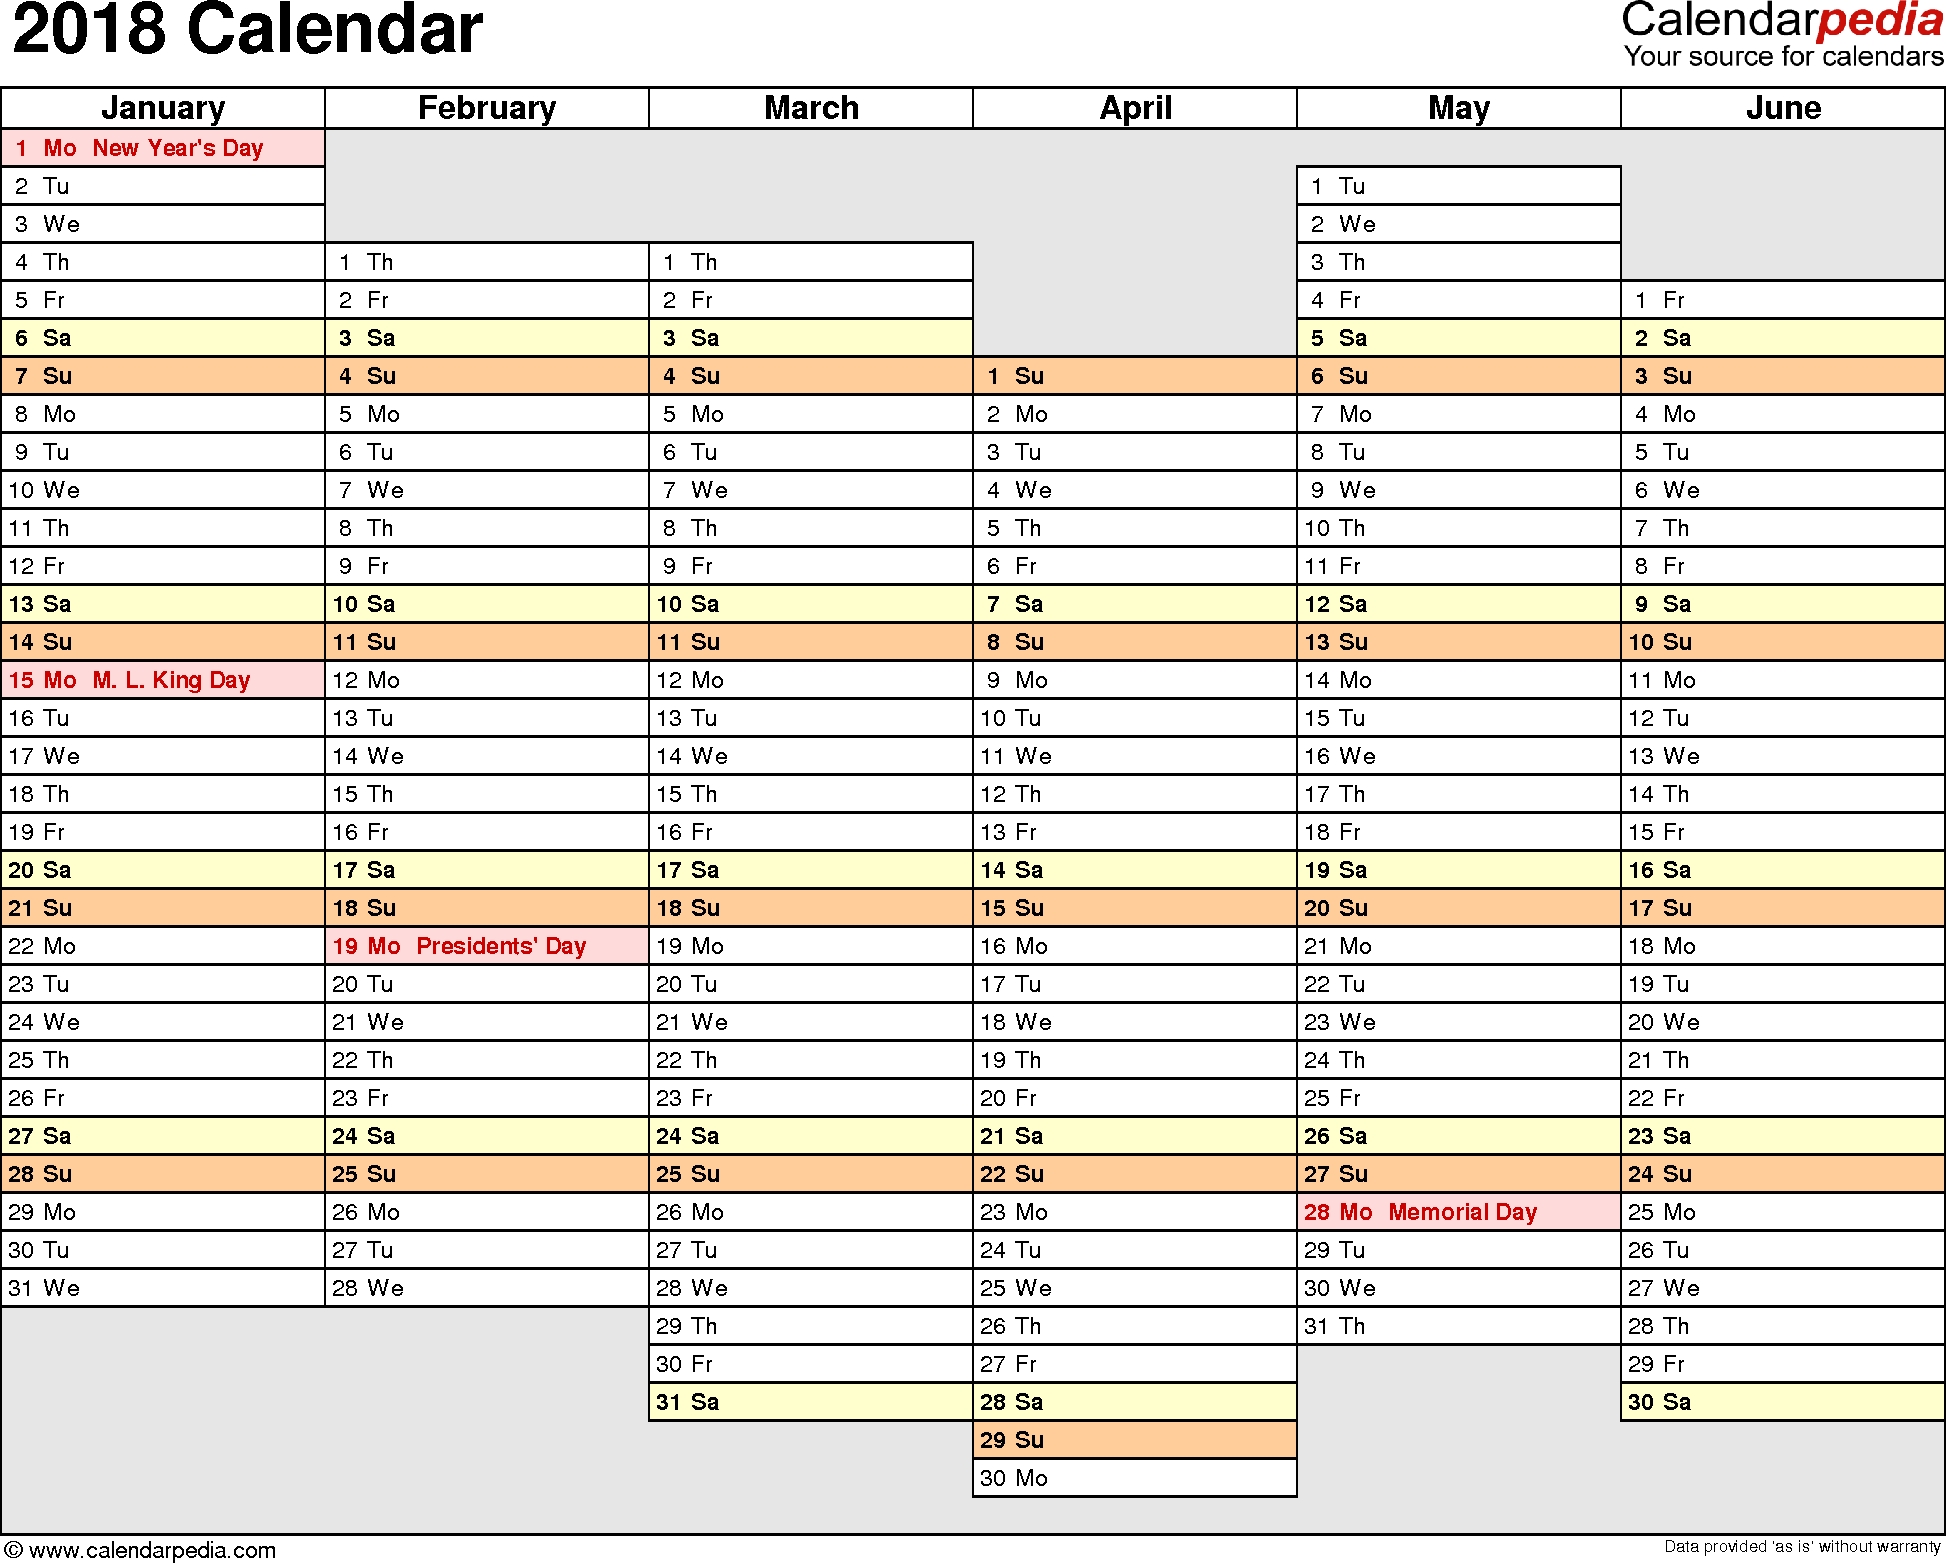 2018 Calendar - Download 17 Free Printable Excel Templates (.xlsx) intended for Annual Calendar Planner Excel Spreadsheet